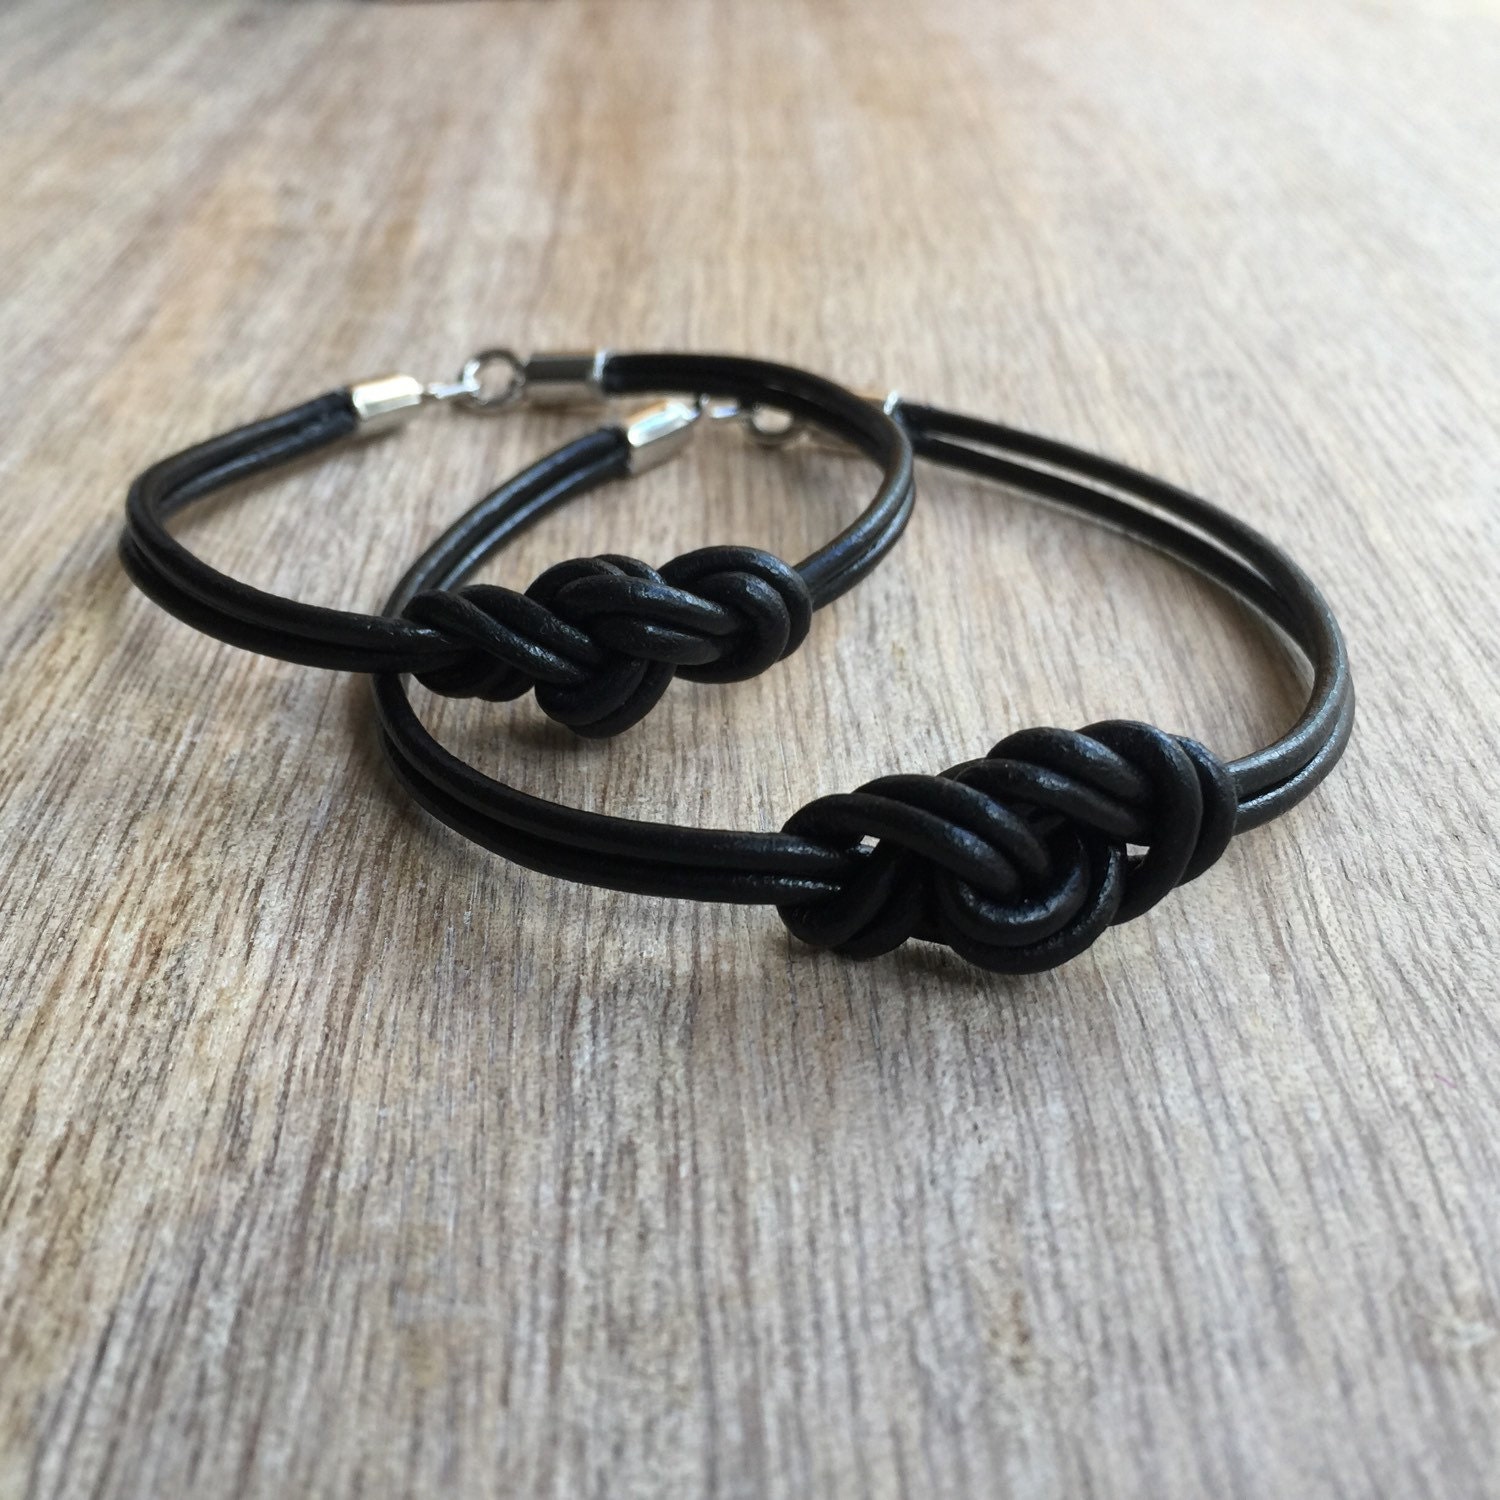 Couples Leather Bracelets His and her Bracelet by Fanfarria